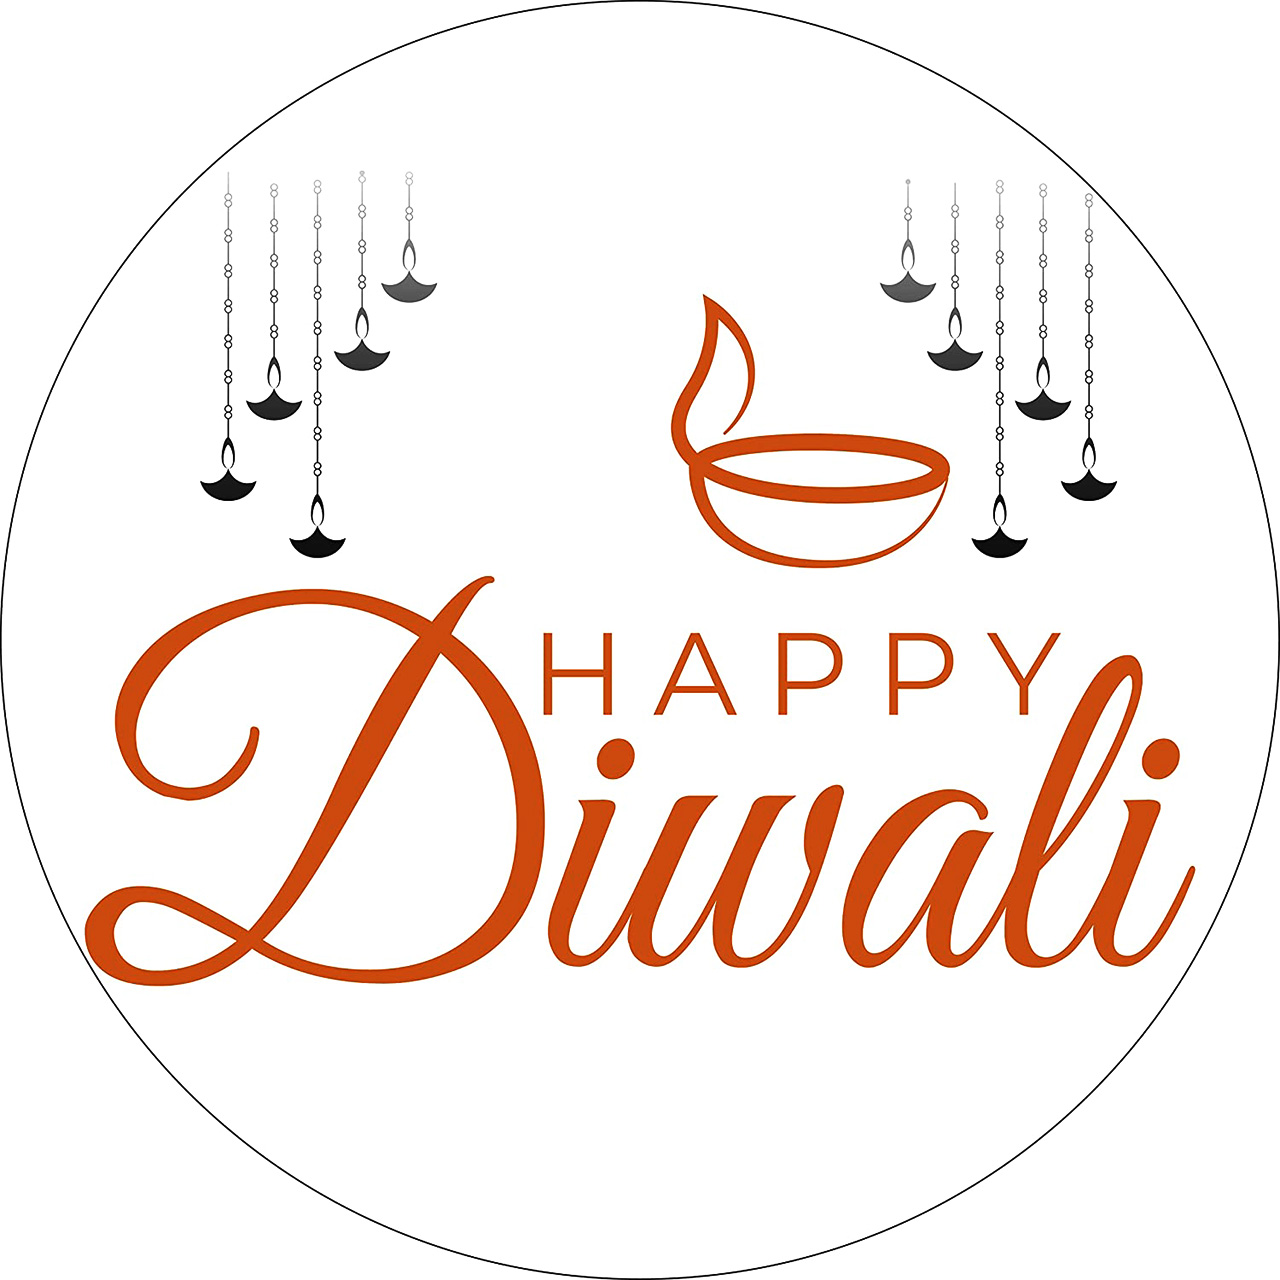 DIWALI STICKERS IDEAL FOR GIFT WRAPPING | DIWALI STICKERS FOR GIFT BAG | HAPPY DIWALI VINYL STICKER